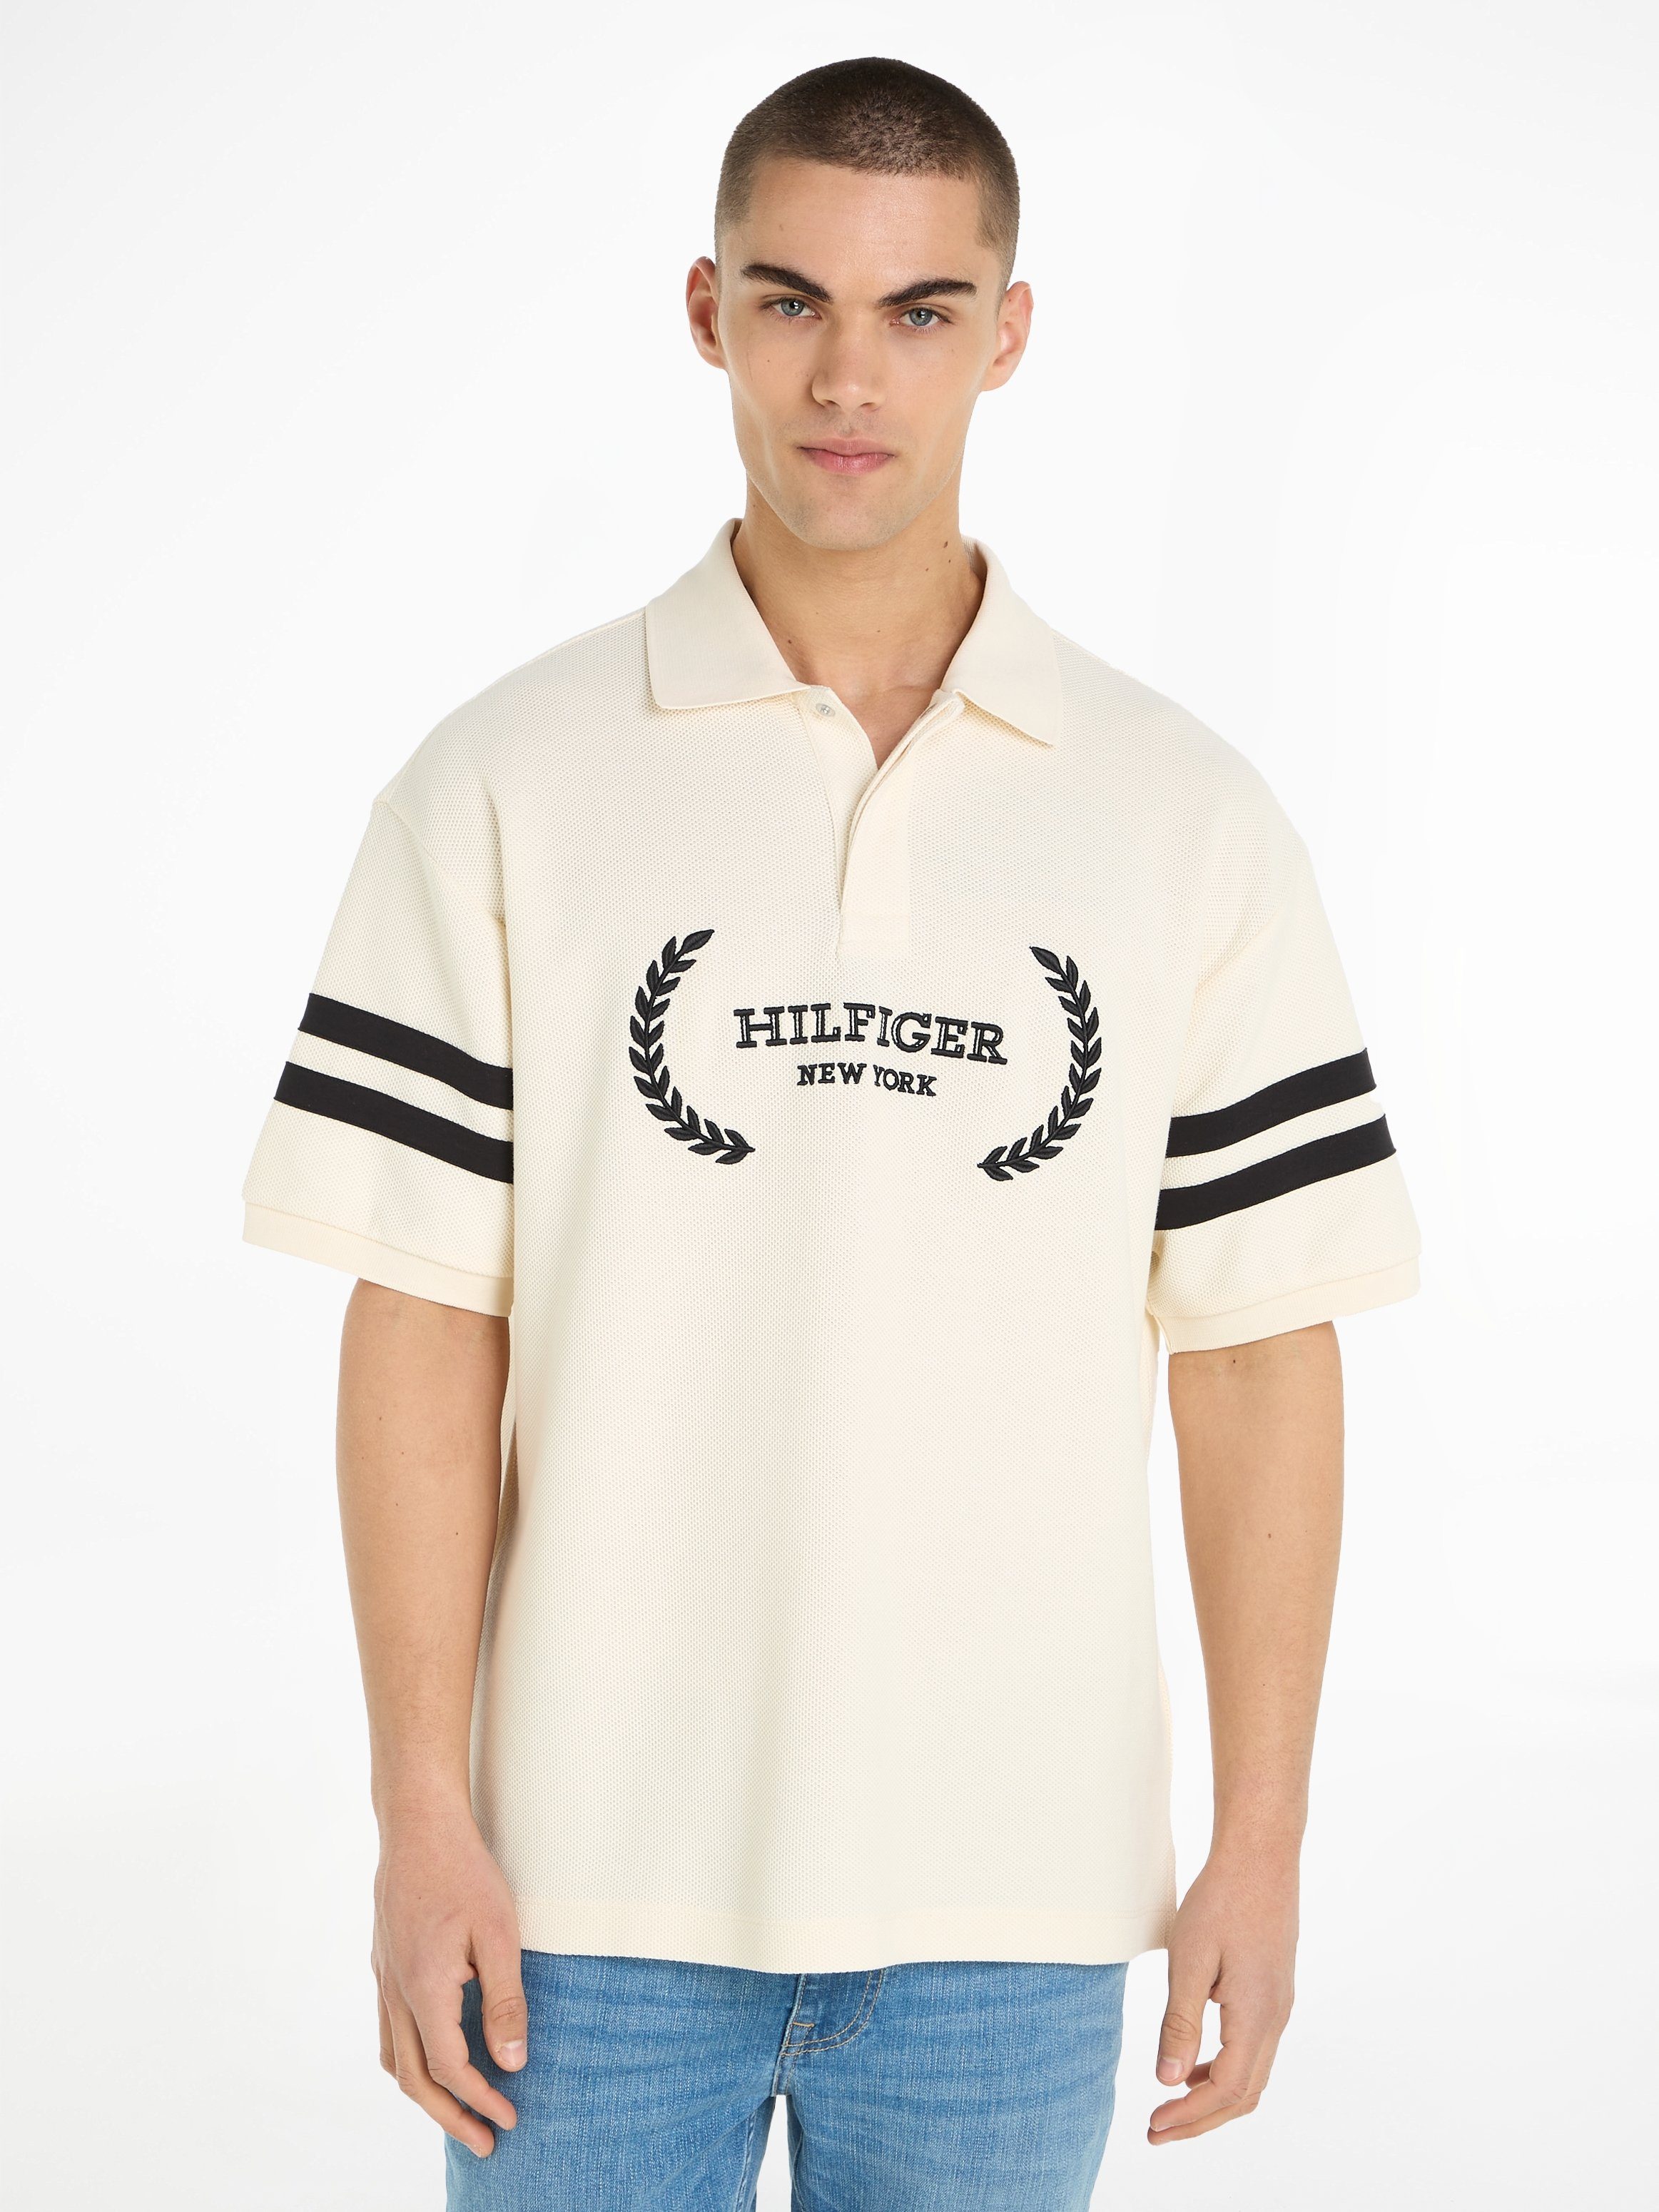 Tommy Hilfiger Poloshirt MONOTYPE PLACEMENT ARCHIVE